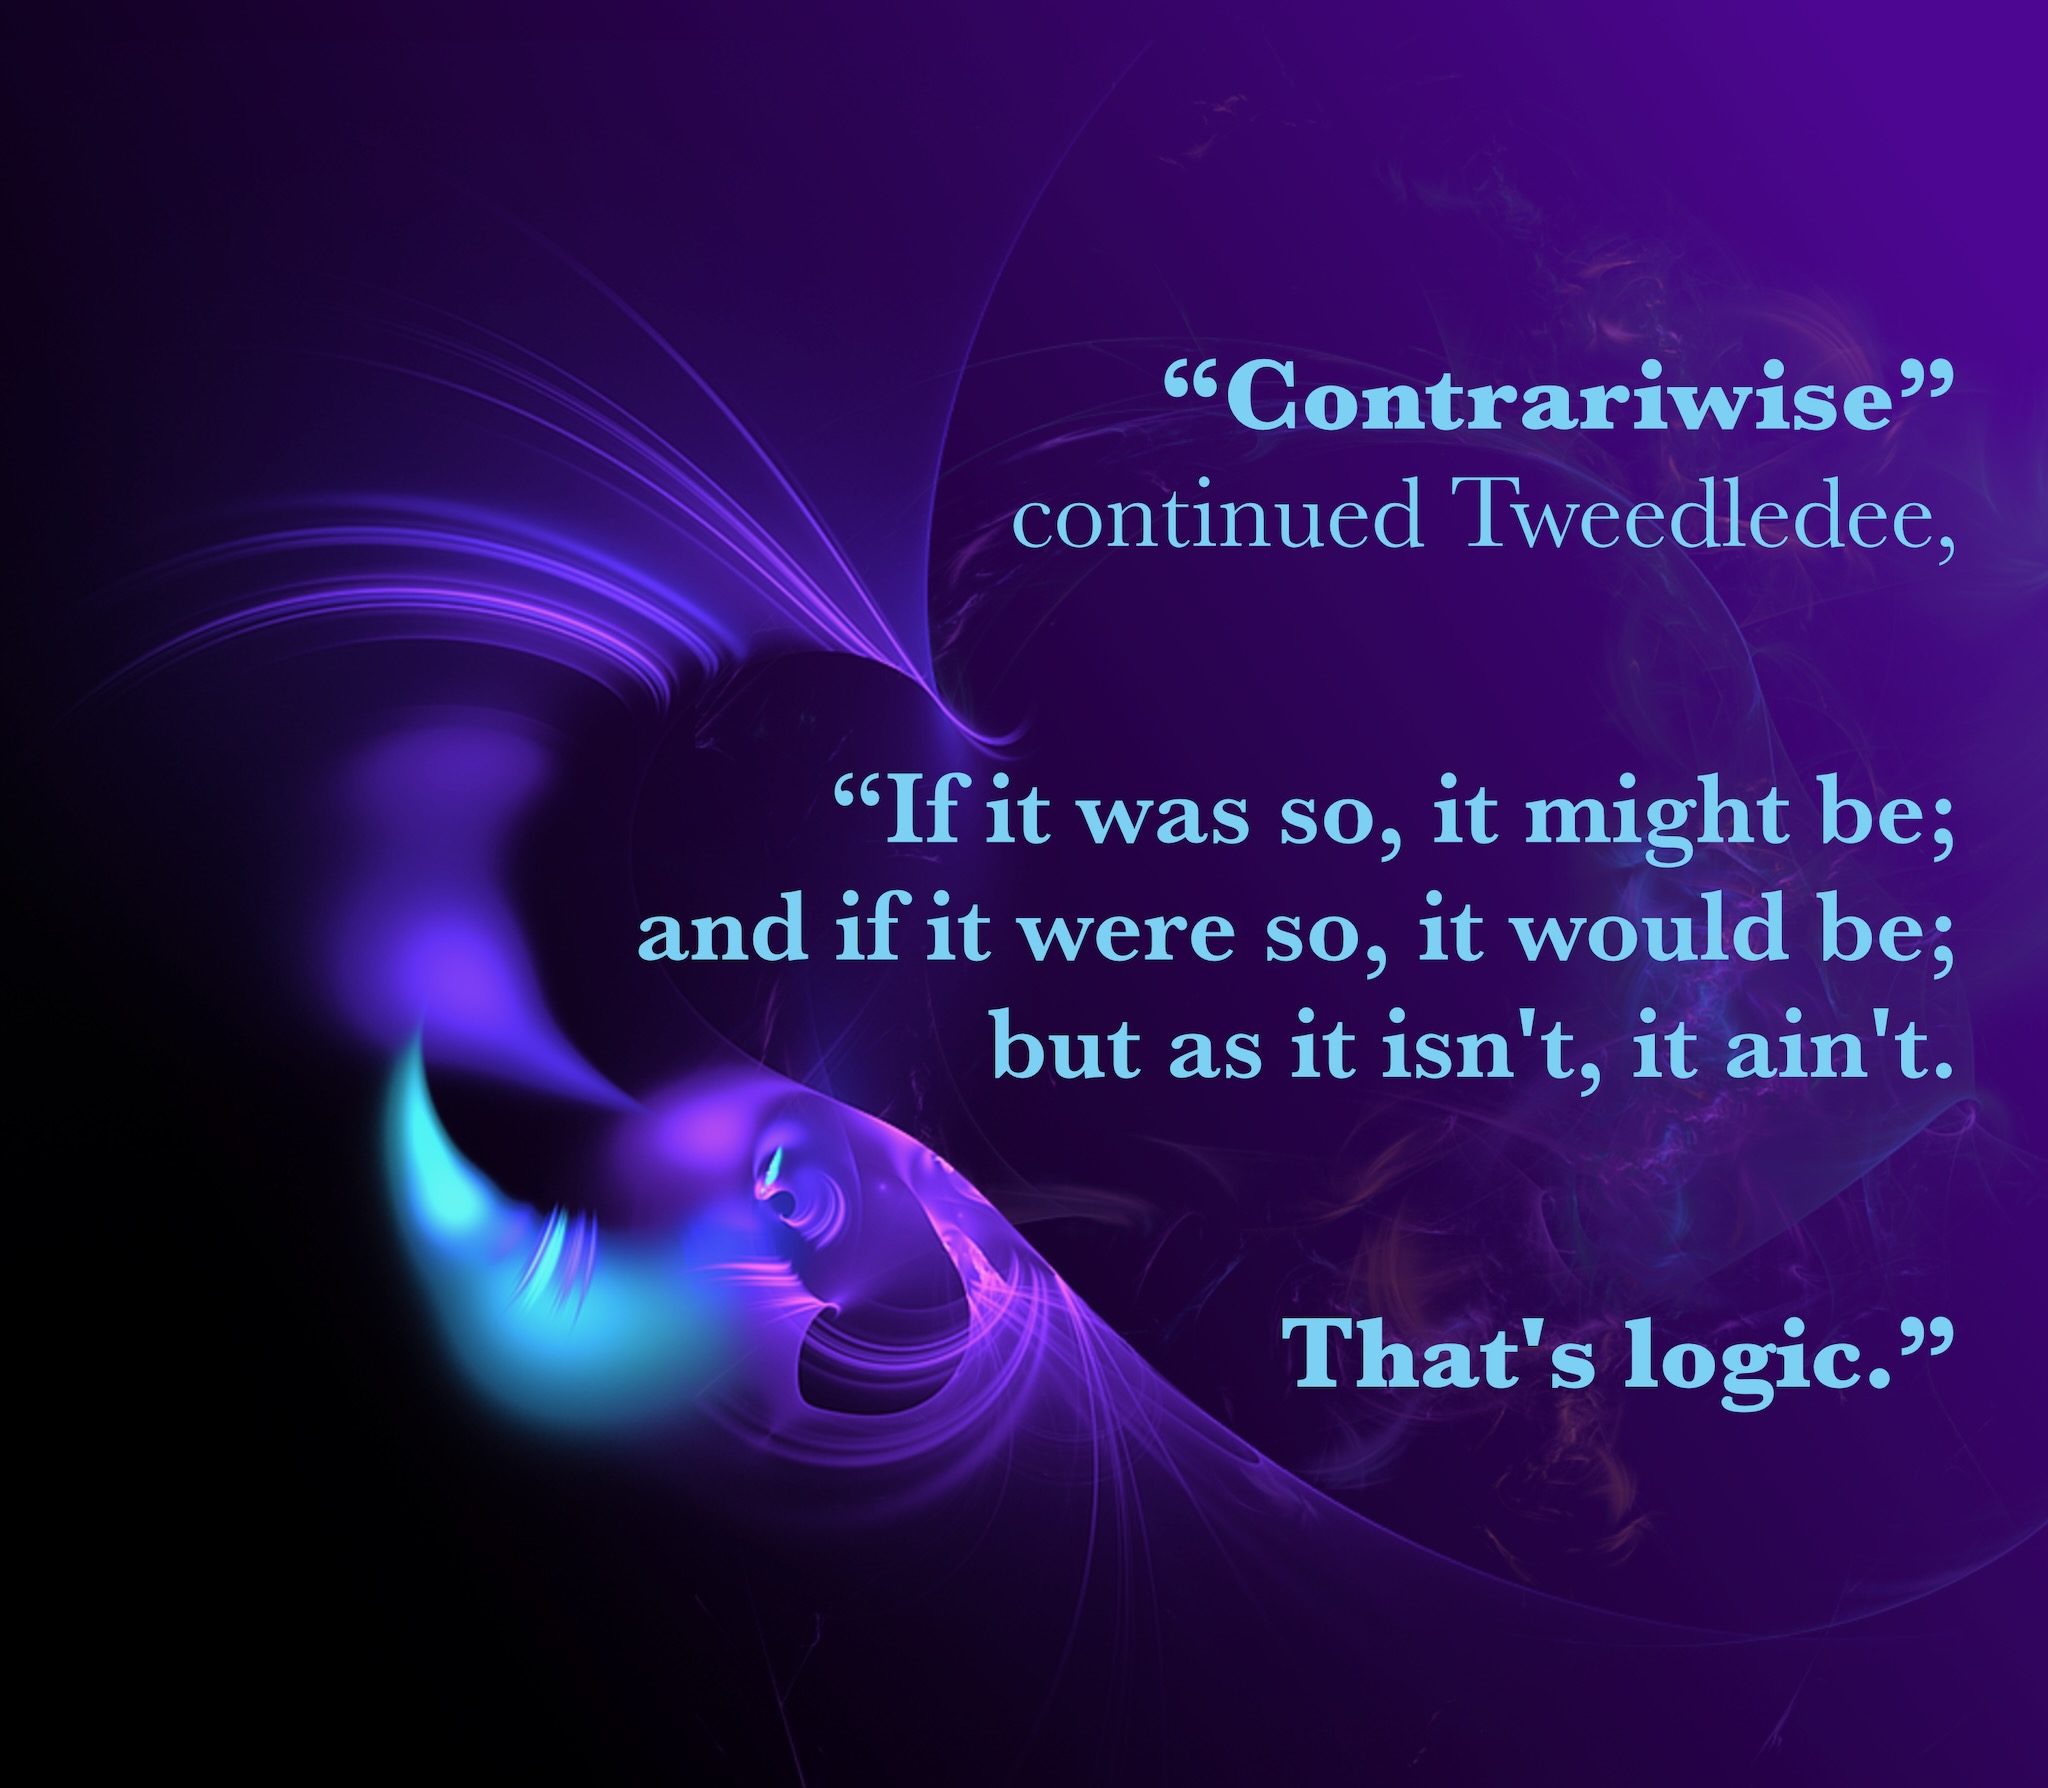 Contrariwise, continued Tweedledee: "If it was so, it might be; and if it were so, it would be; but as it isn't, it ain't. That's logic.